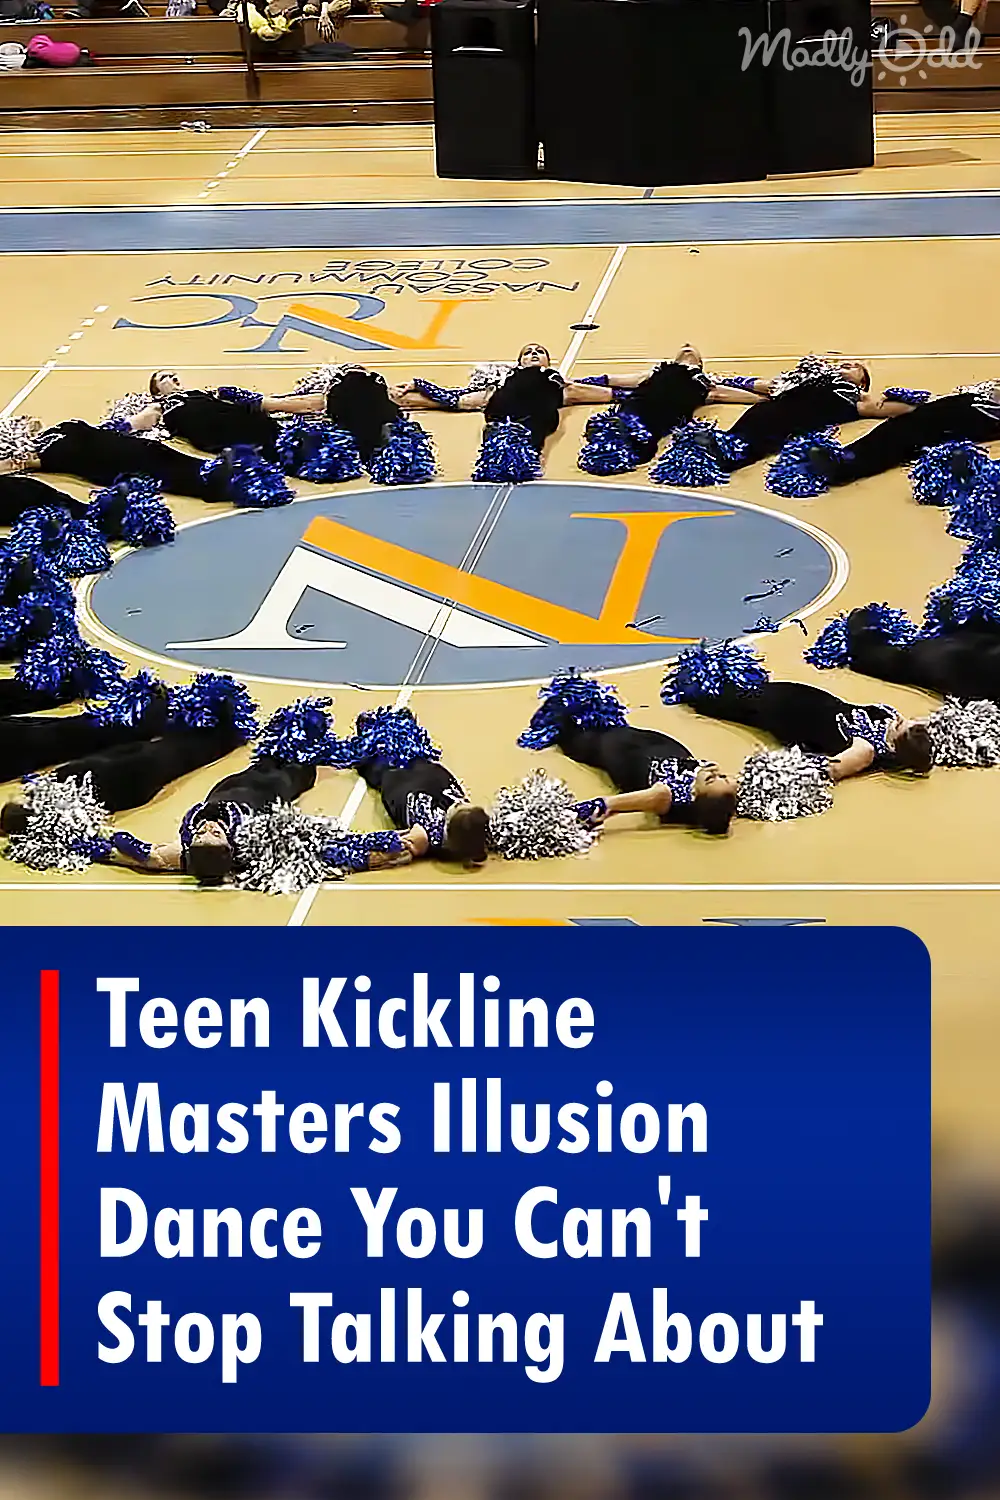 Teen Kickline Masters Illusion Dance You Can\'t Stop Talking About